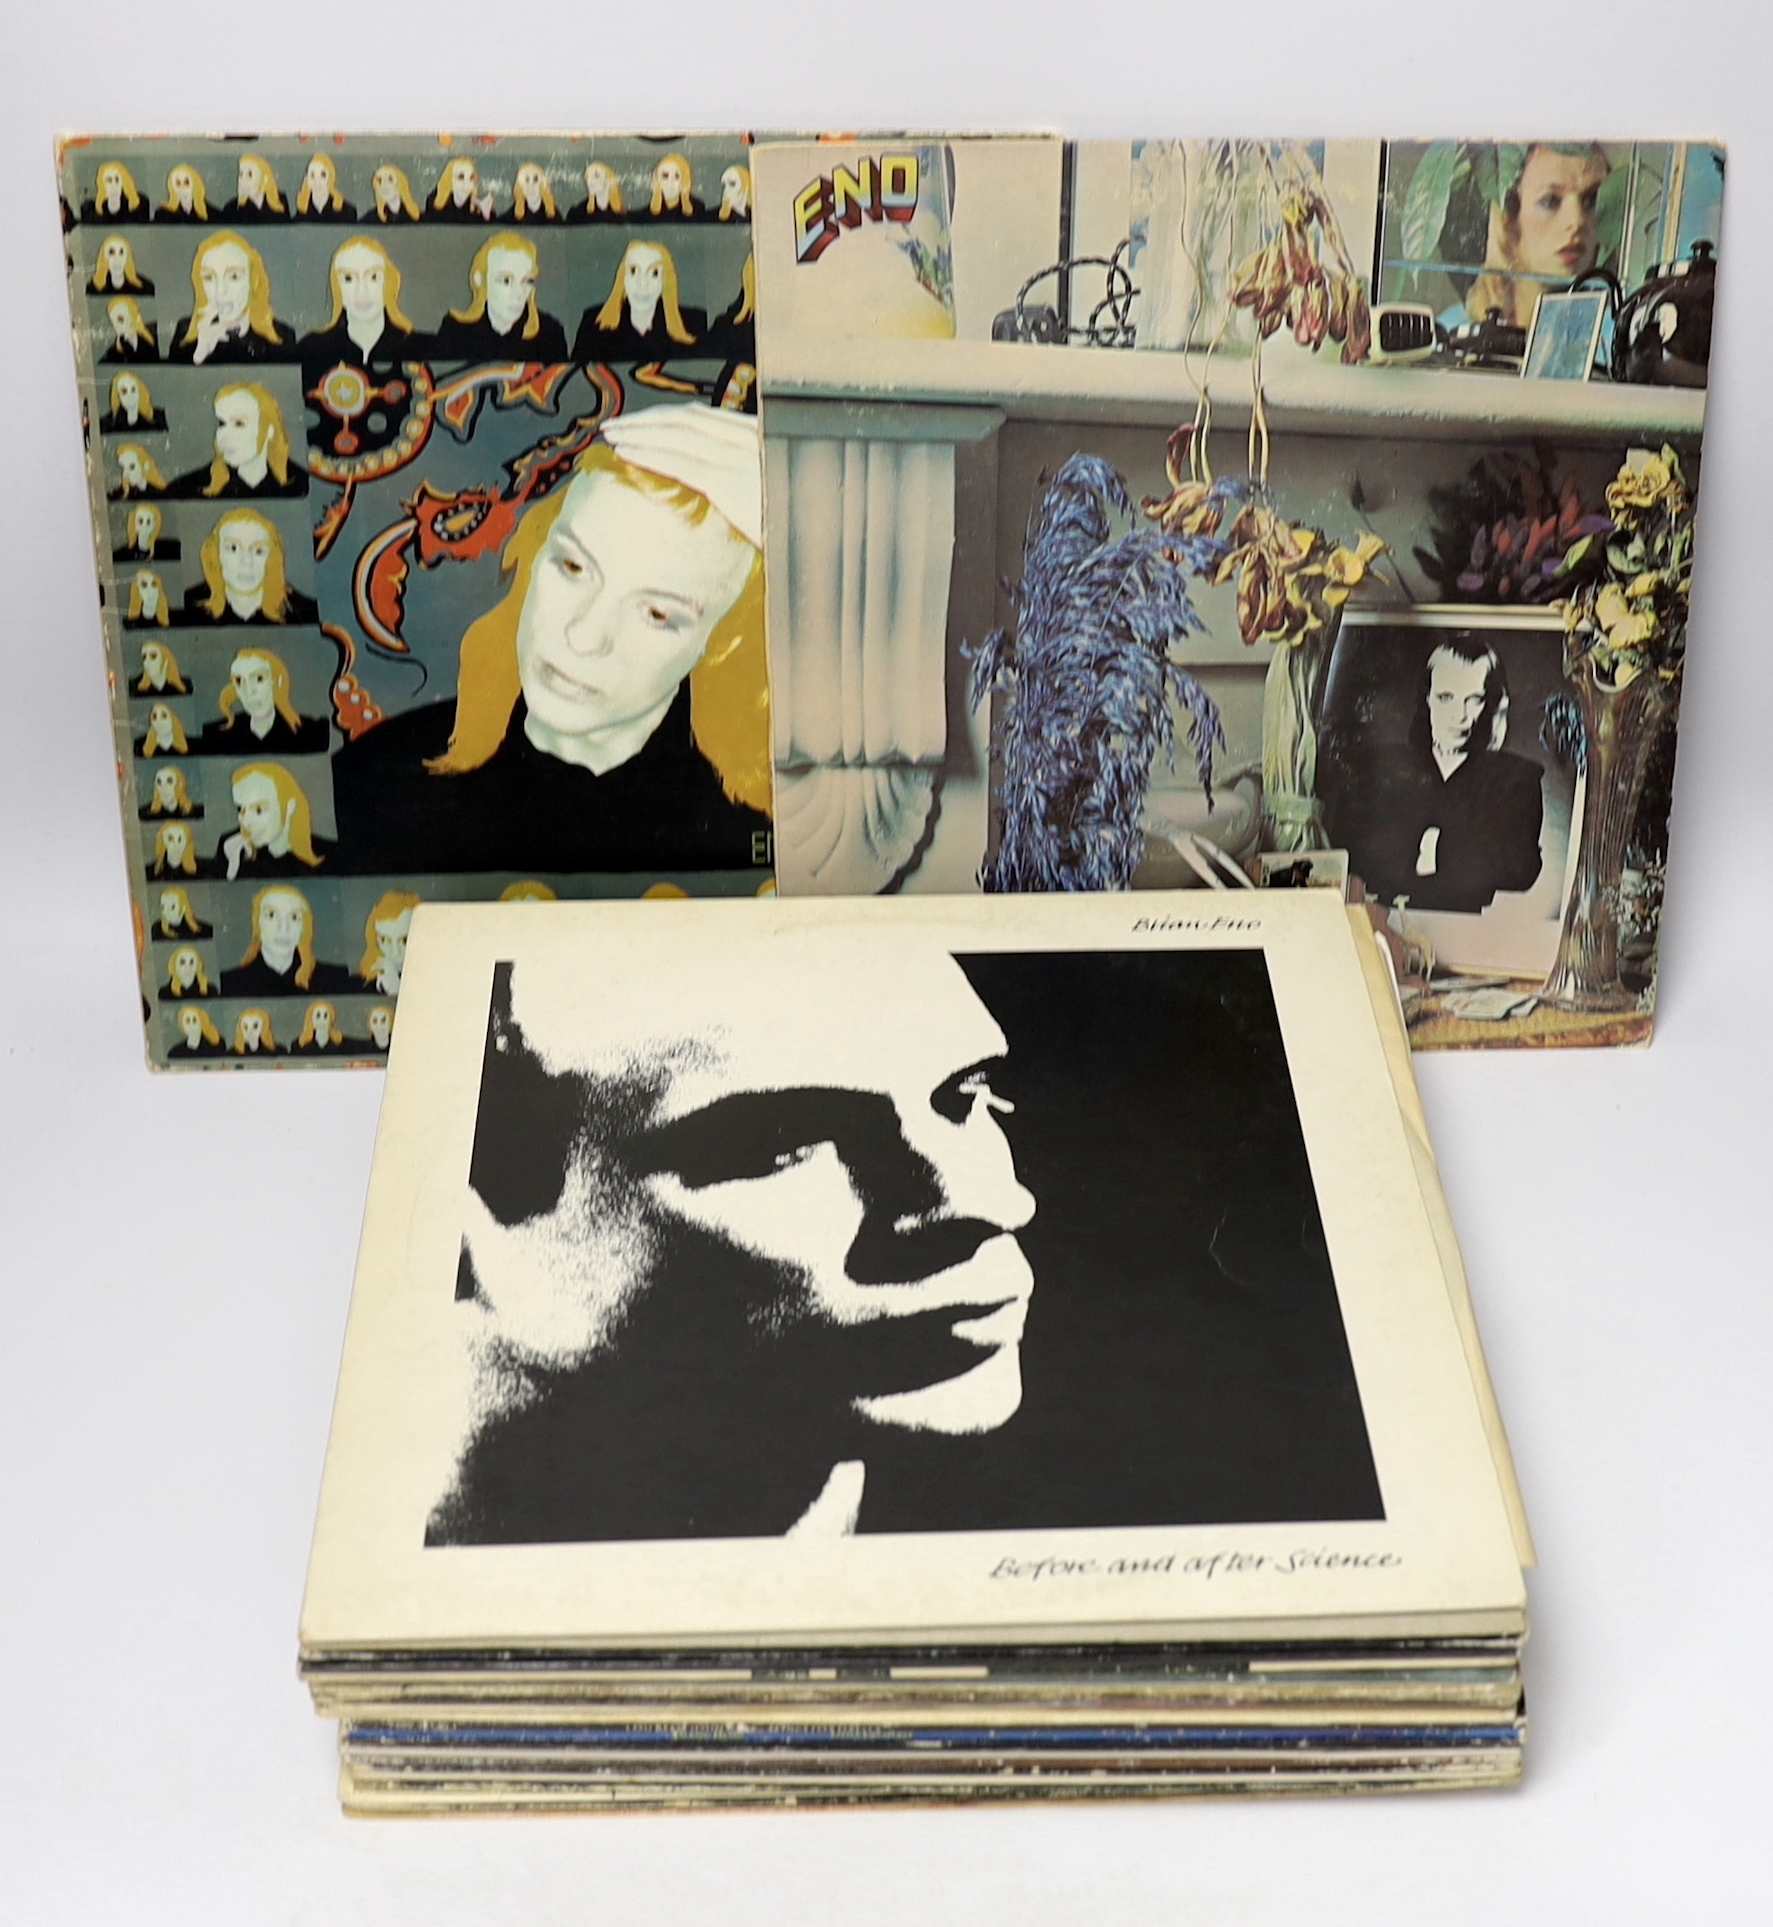 Twenty-four LP albums by Brian Eno, Talking Heads, Lou Reed and David Bowie, albums include Taking Tiger Mountain, Here Come the Warm Jets, Before and After Science, Music for Films, Another Green World, New York, Transf